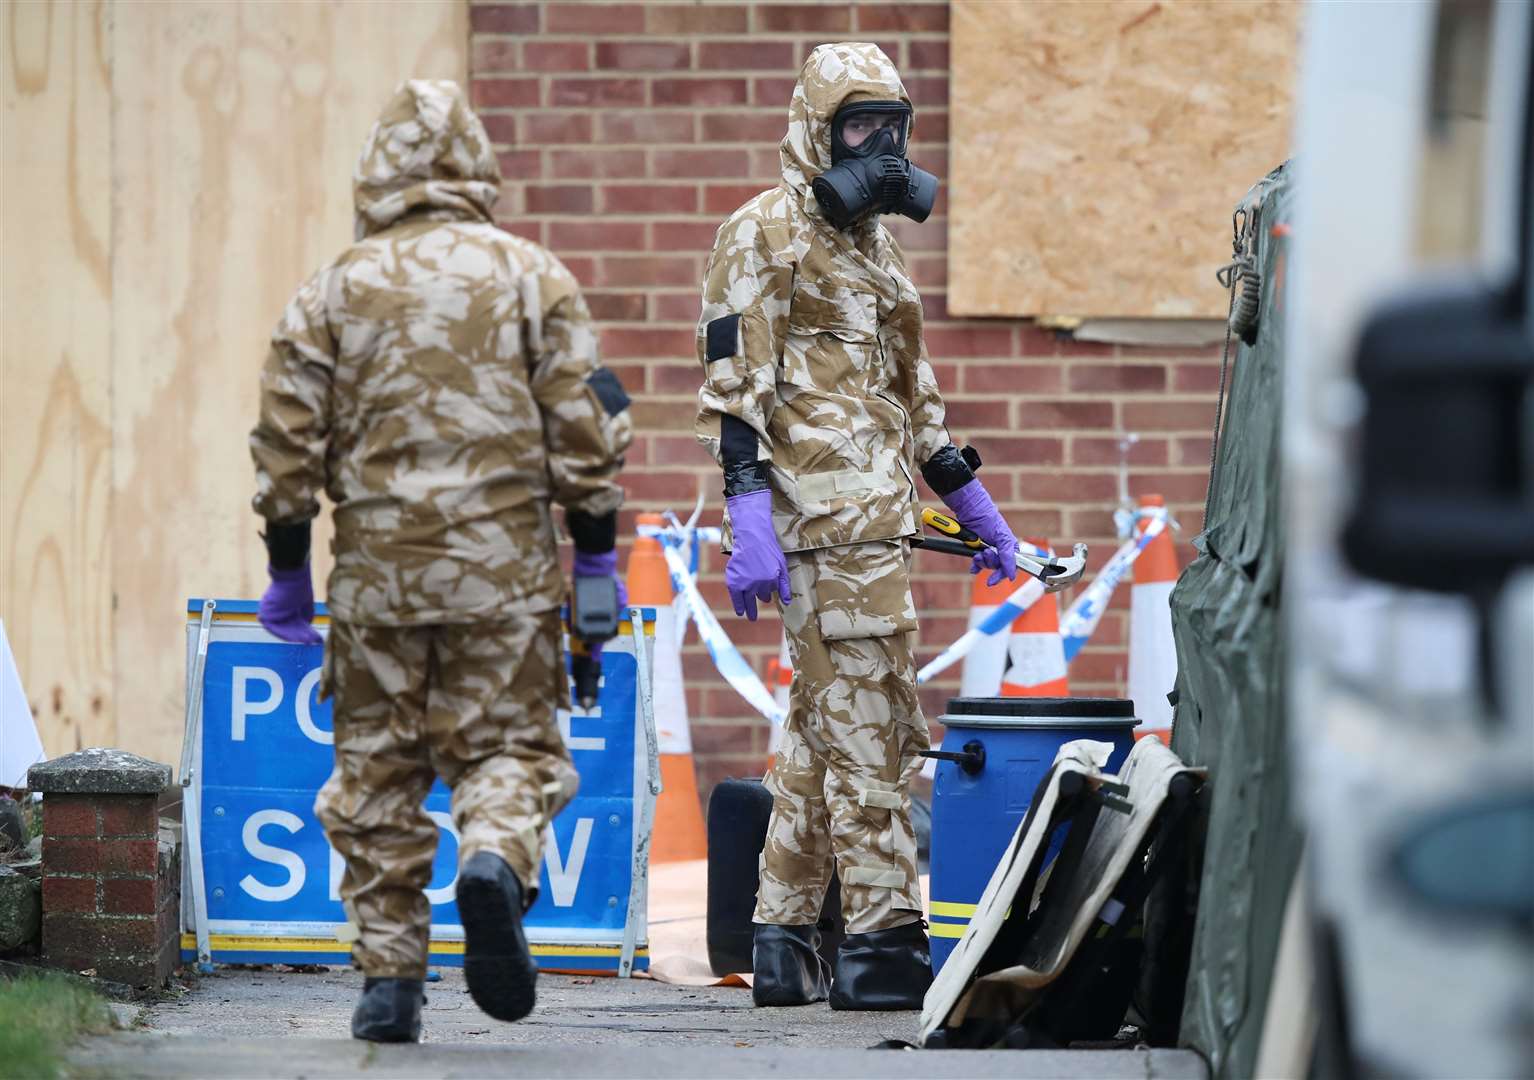 The UK Government accused Russia of being behind the Novichok attack in Salisbury in 2018 (Andrew Matthews/PA)